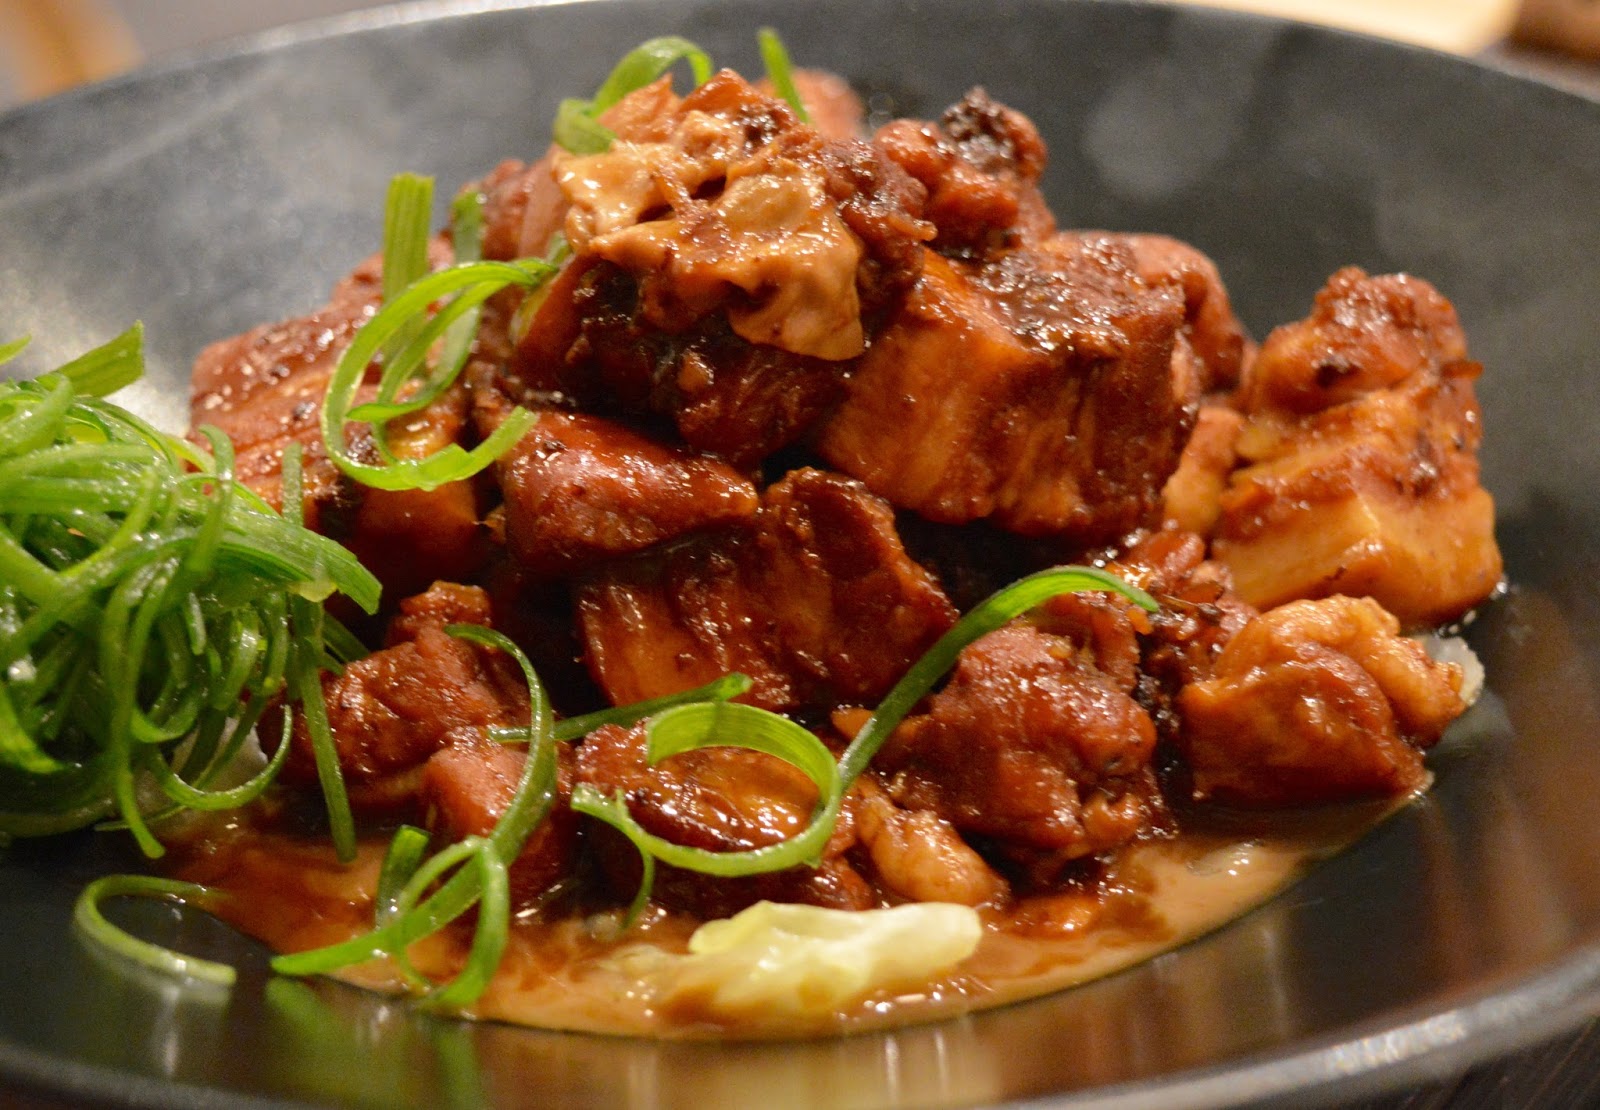 La Yuan Newcastle Menu Review | Tasty & Authentic Sichuan Cuisine - Hung So Slow cooked Belly Pork